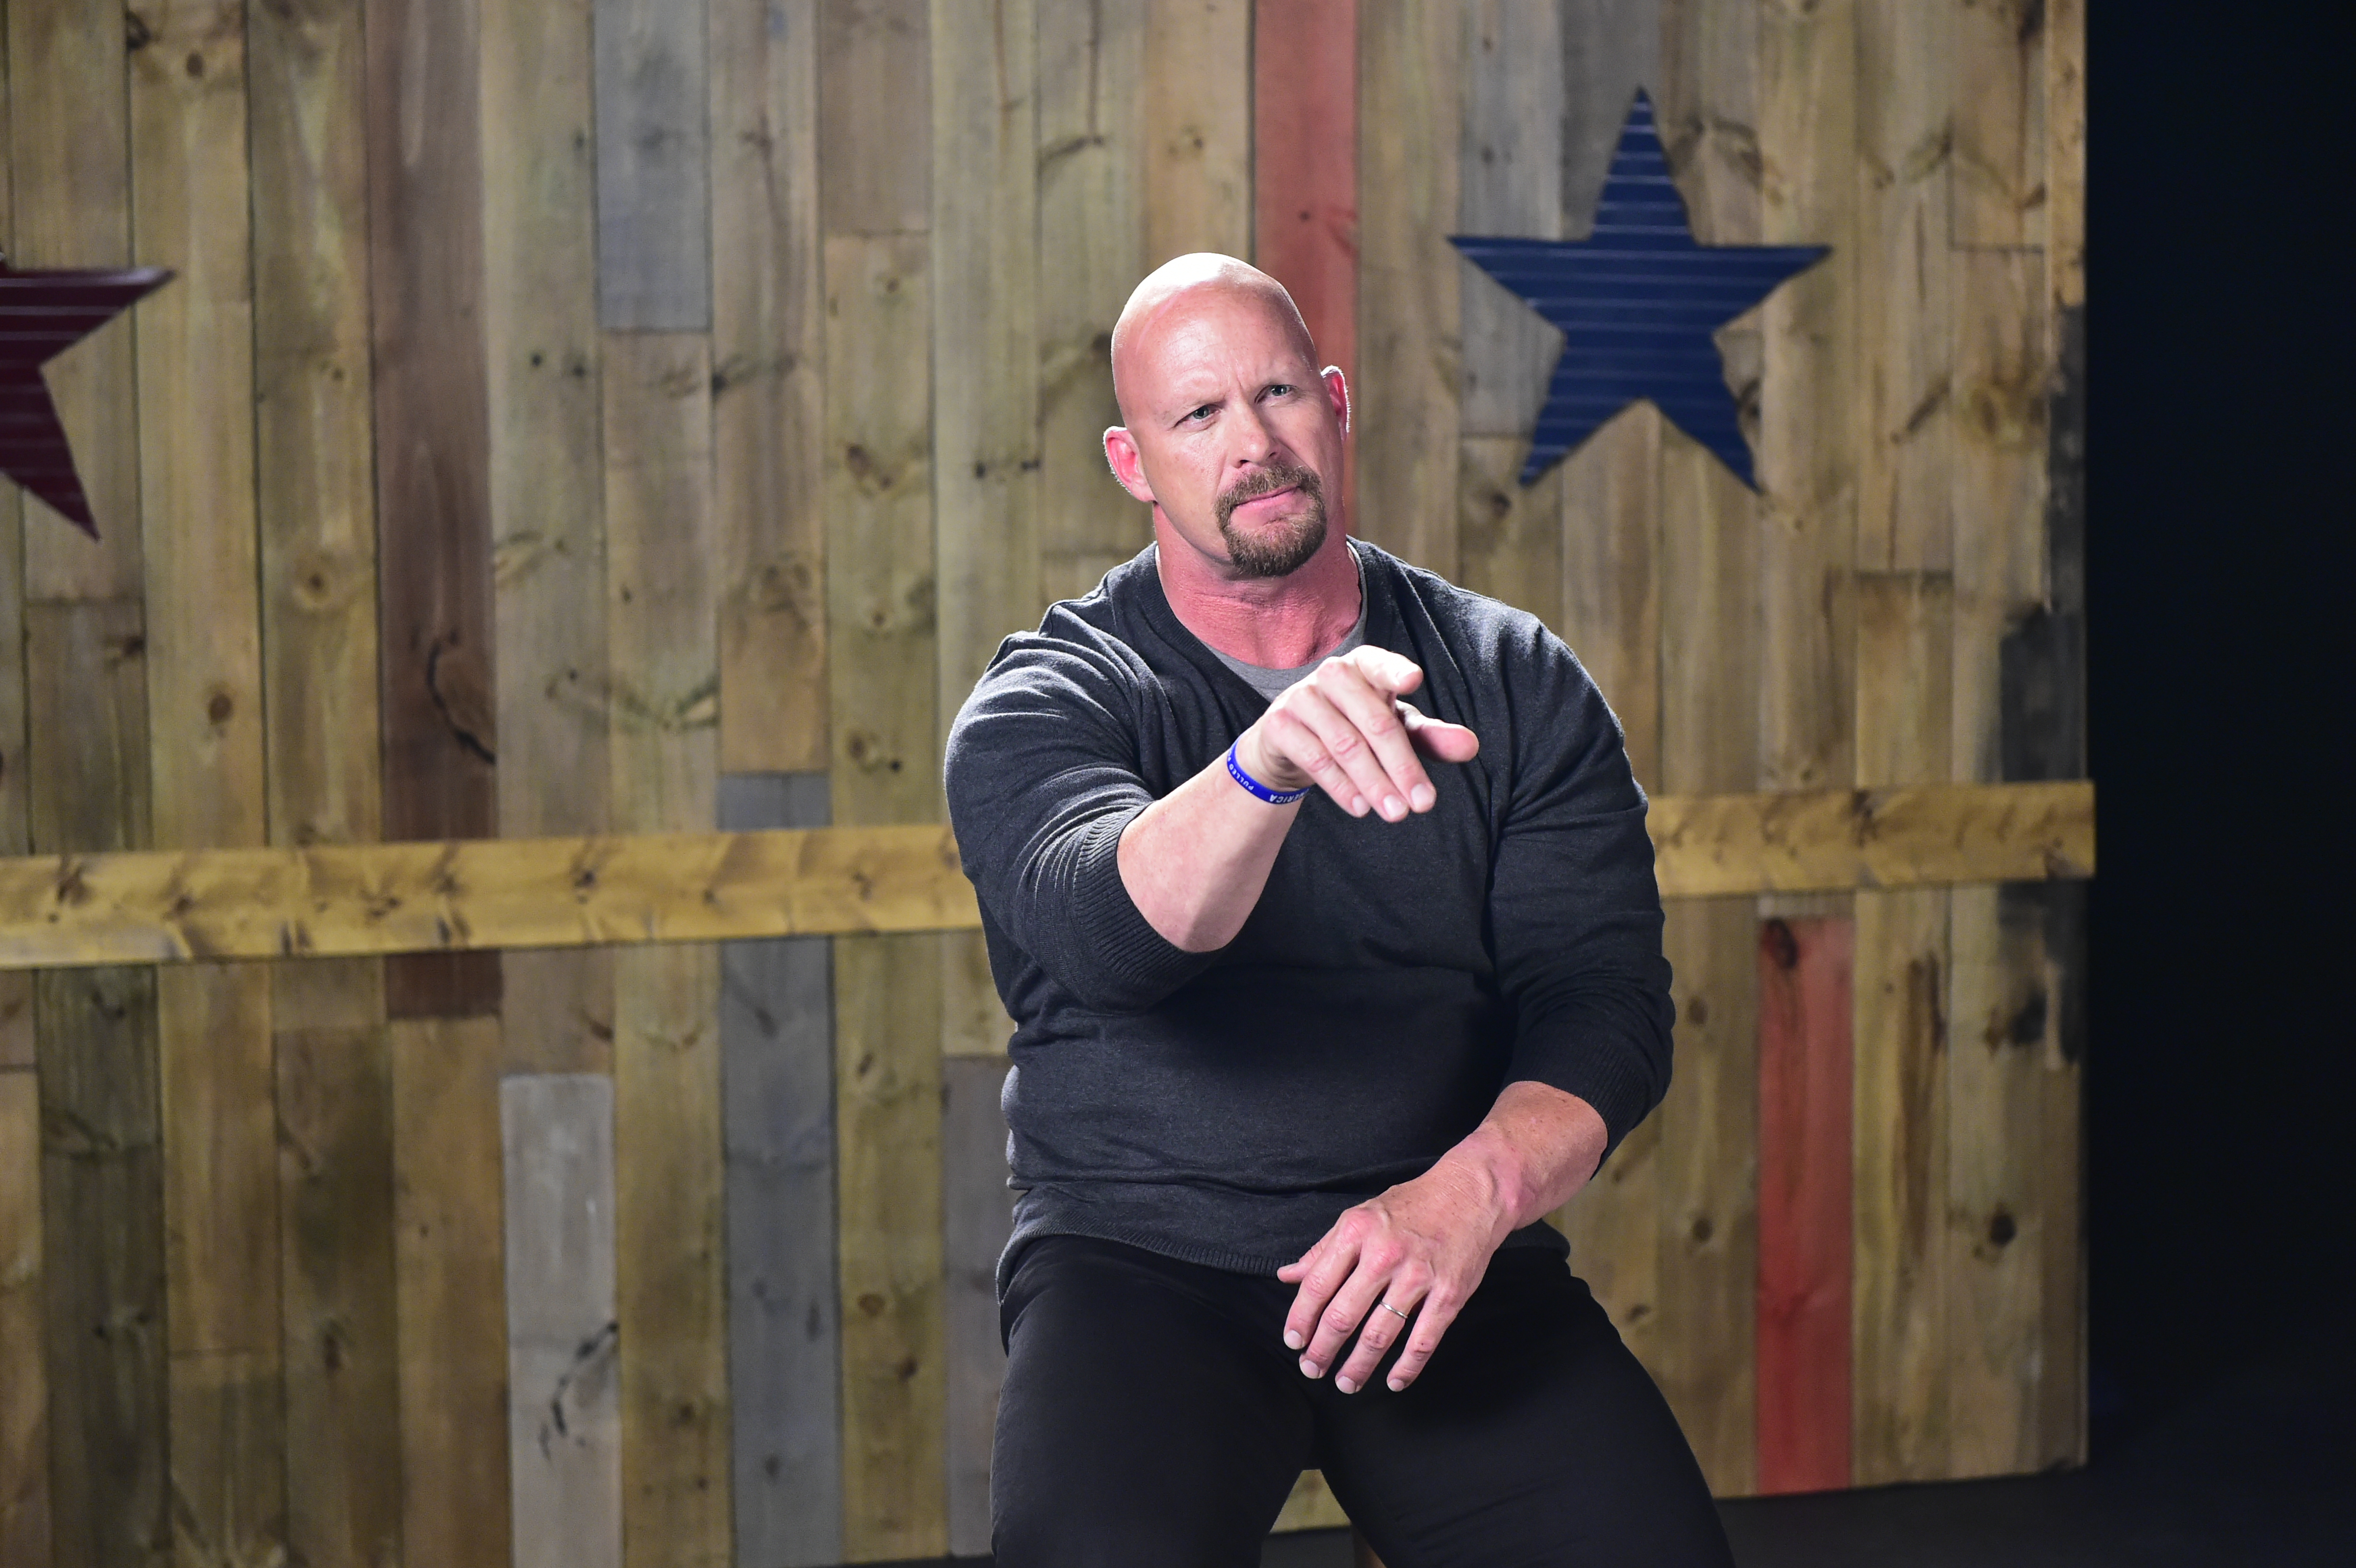 Stone Cold Steve Austin 3:16 Day :: The Whale :: A Craft Beer Collective